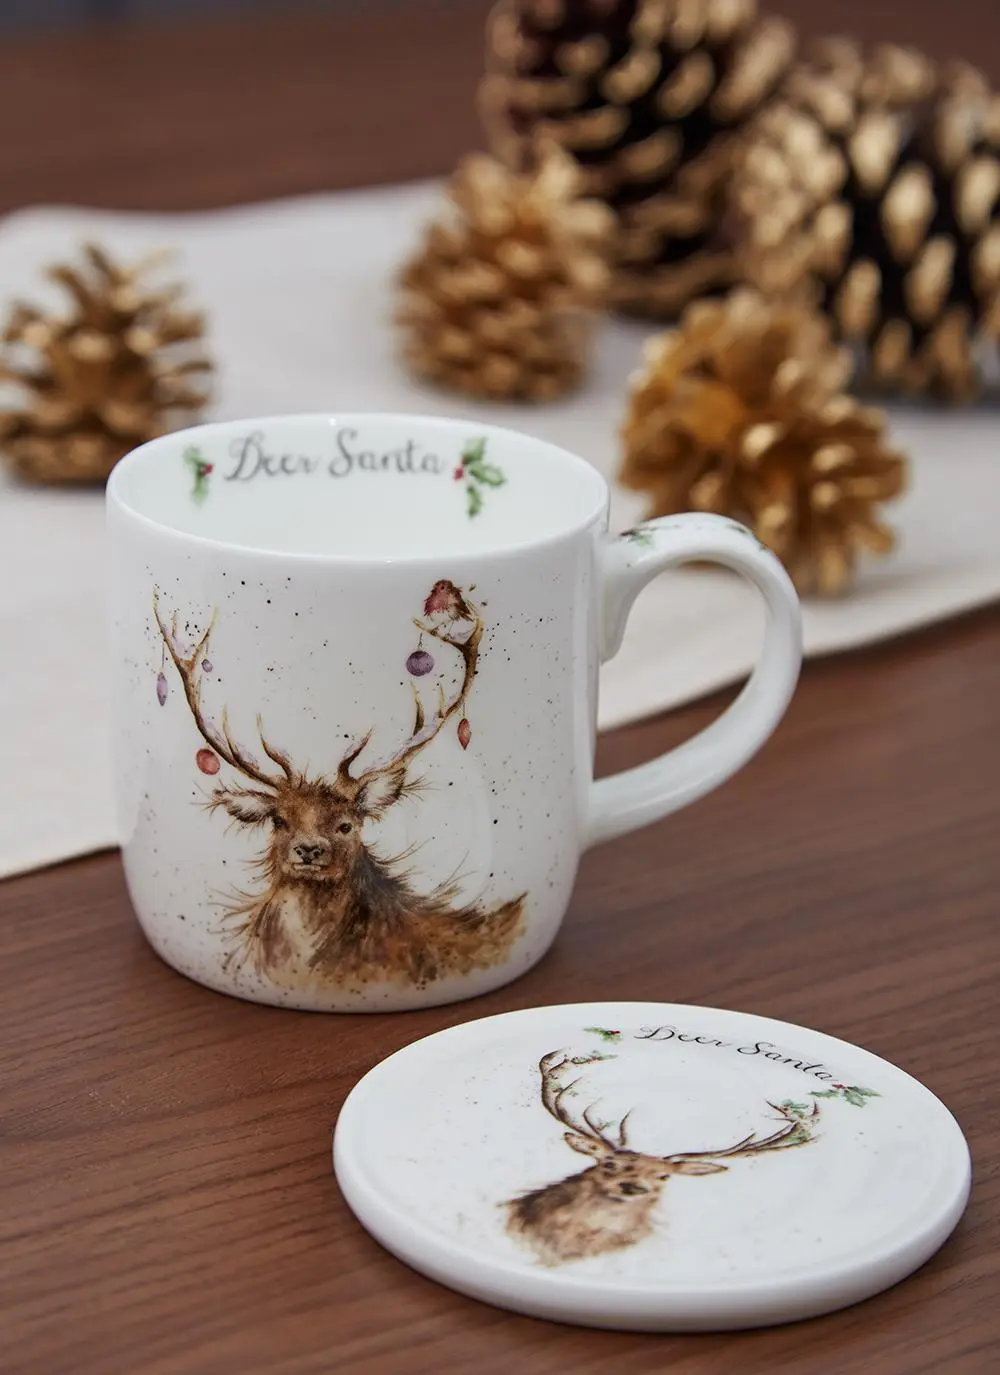 https://www.blarney.com/contentFiles/productImages/Large/stag%20christmas%20mug%20and%20coaster.webp